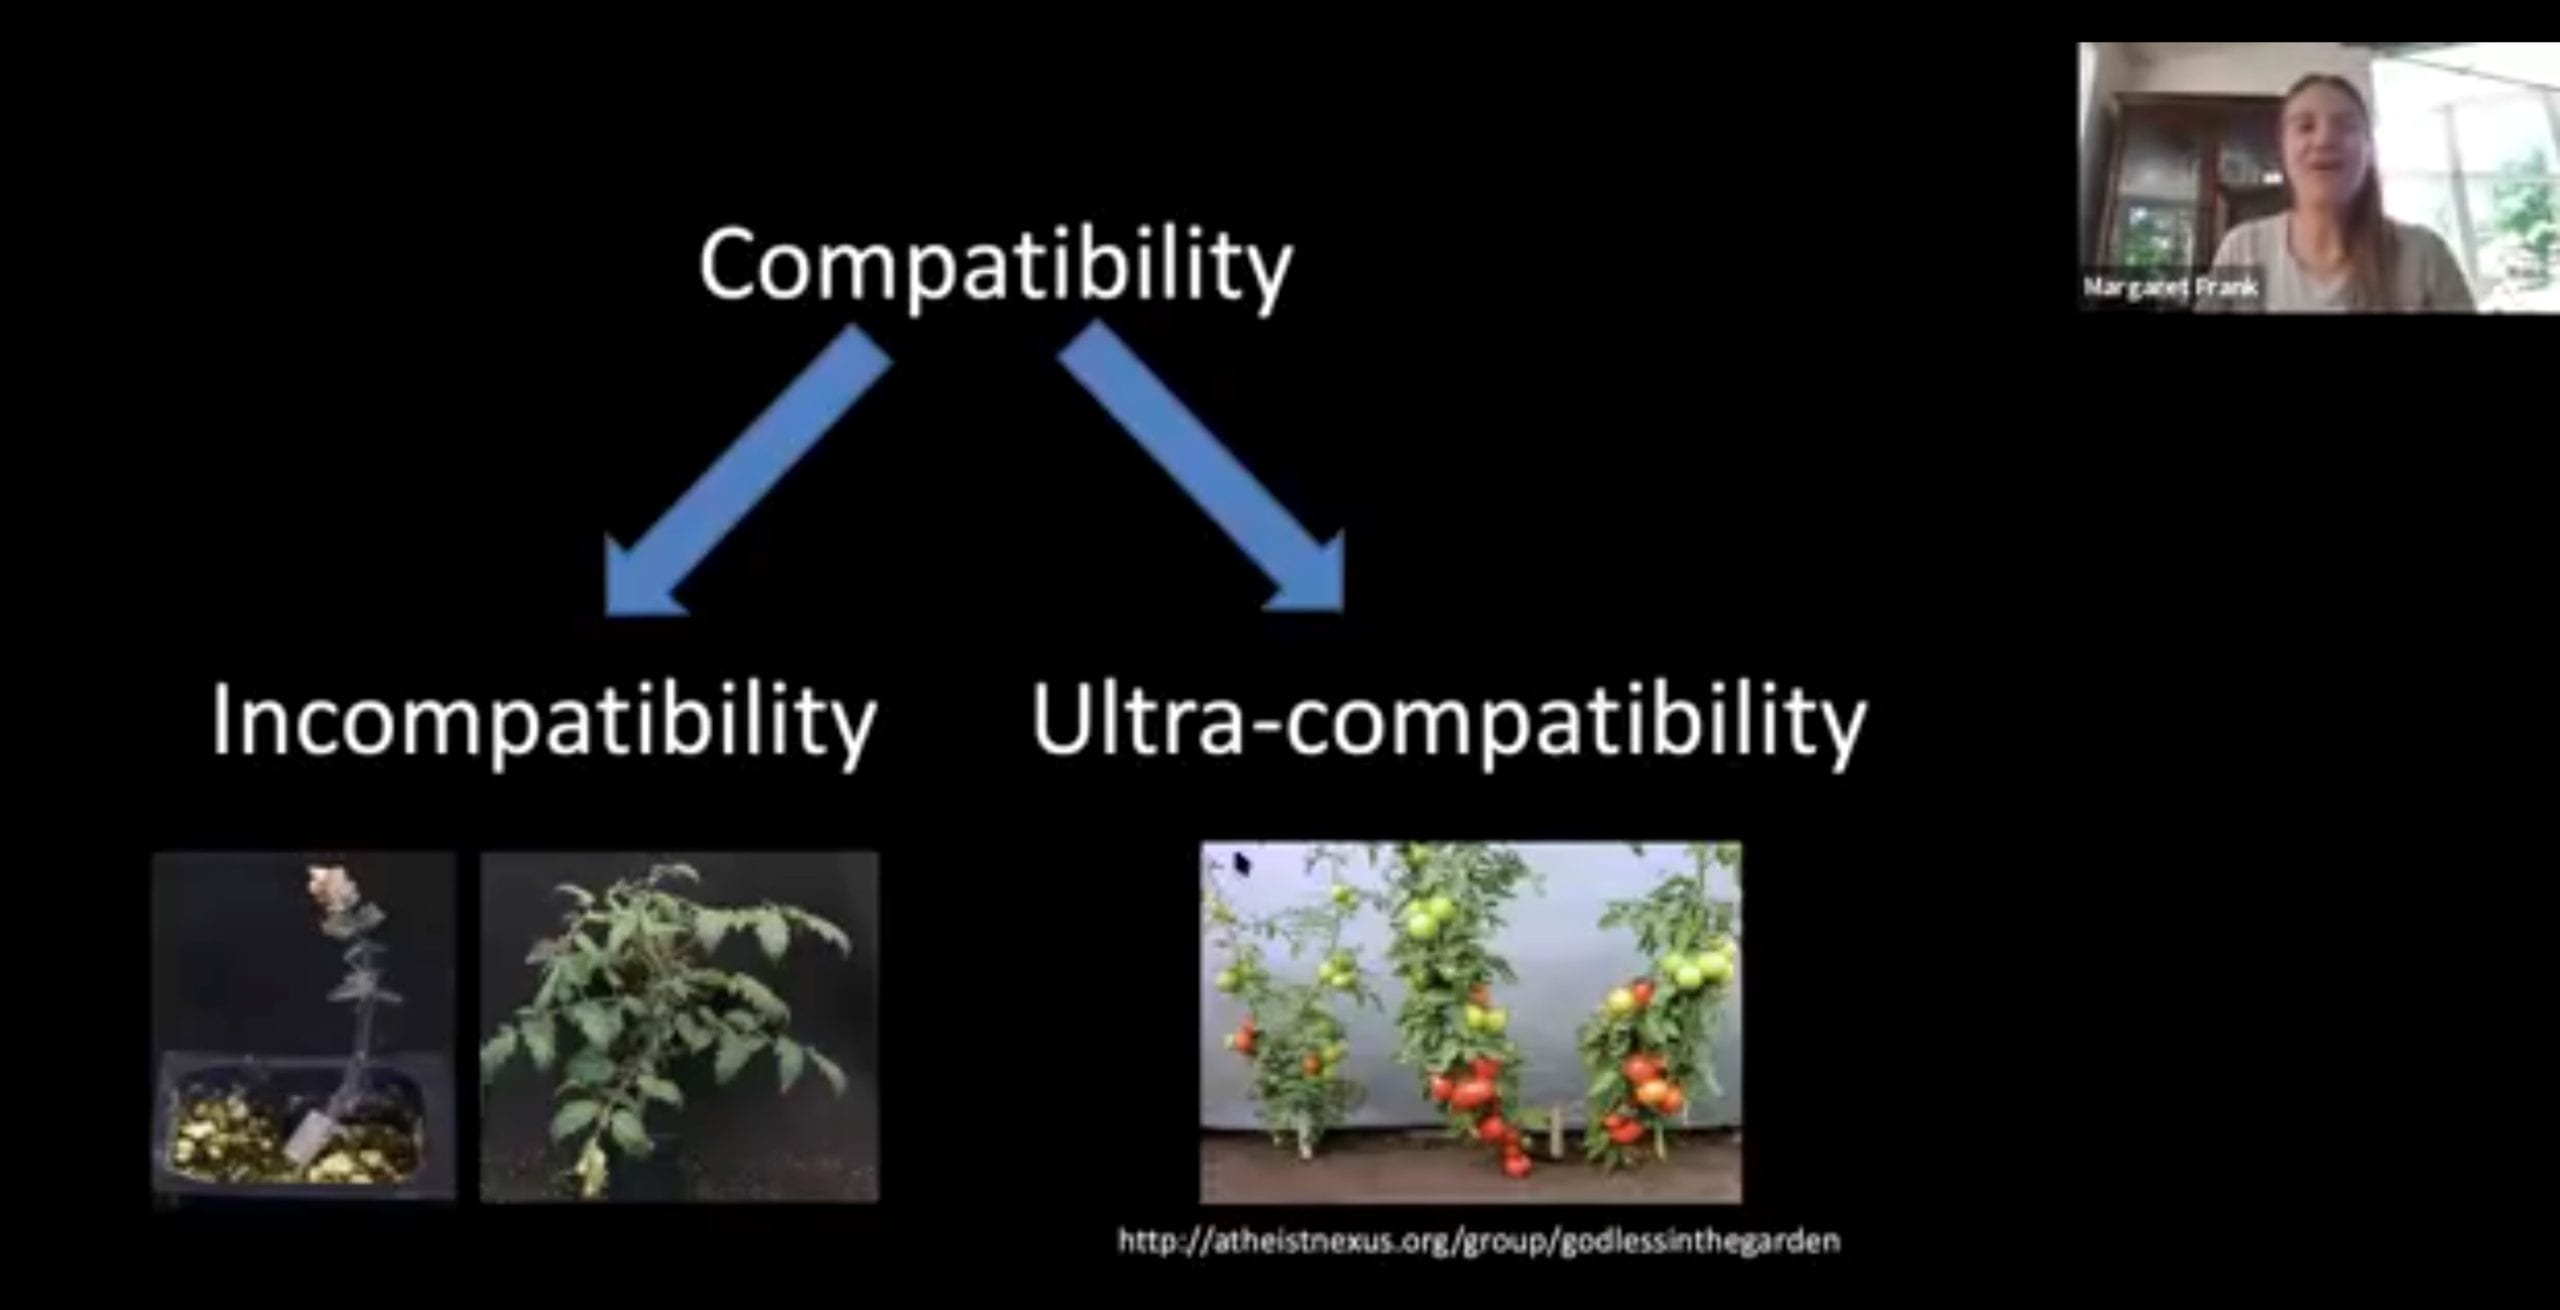 A mostly black image with the word "Compatibility" at the top, and two blue arrows pointing diagonally down. To the bottom left is the word "Incompatibility" with a picture of stunted plants. To the bottom right is the word "Ultra-compatibility" with a picture tomato plants bursting with fruit. At the top right is a medium close-up picture of Margaret Frank.